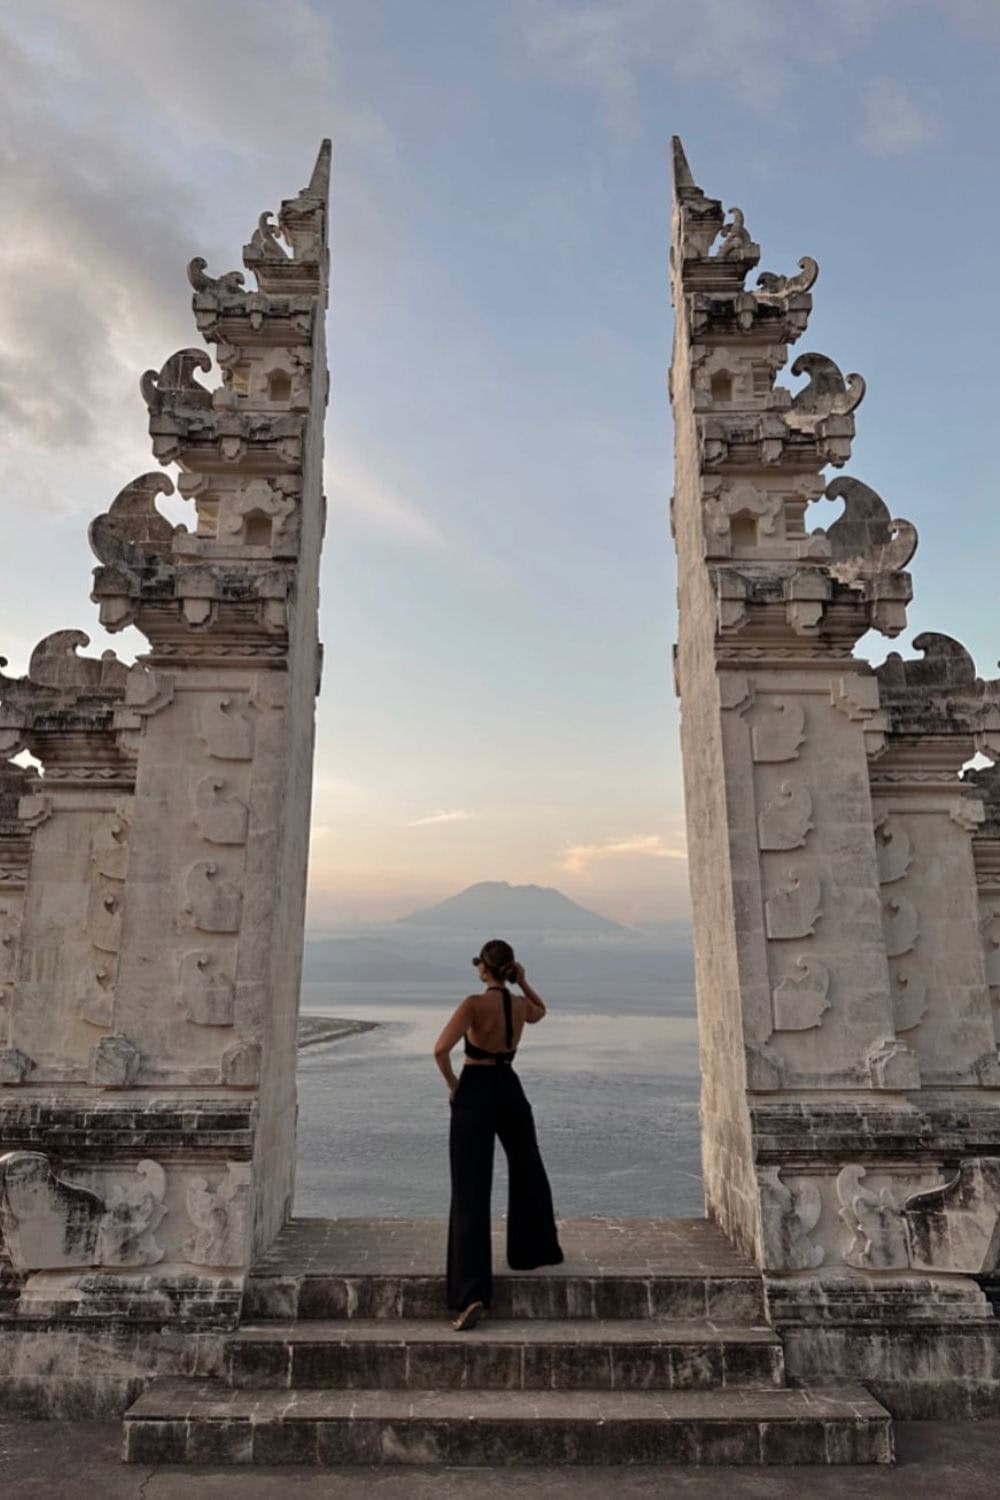 What to wear in Bali when climbing Candidasa Temple